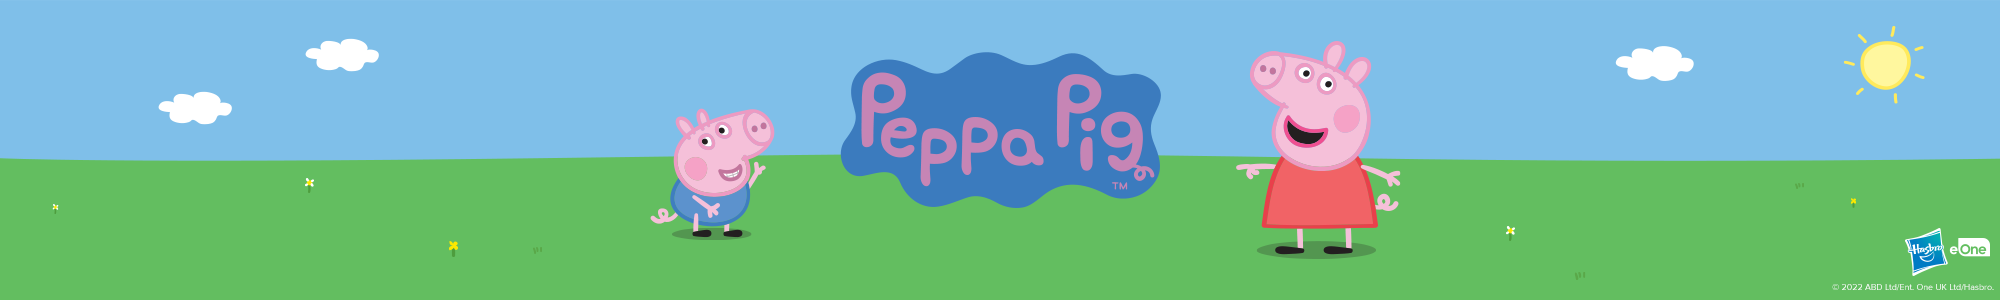 Peppa Pig Brand Page Banner_2000x300.png